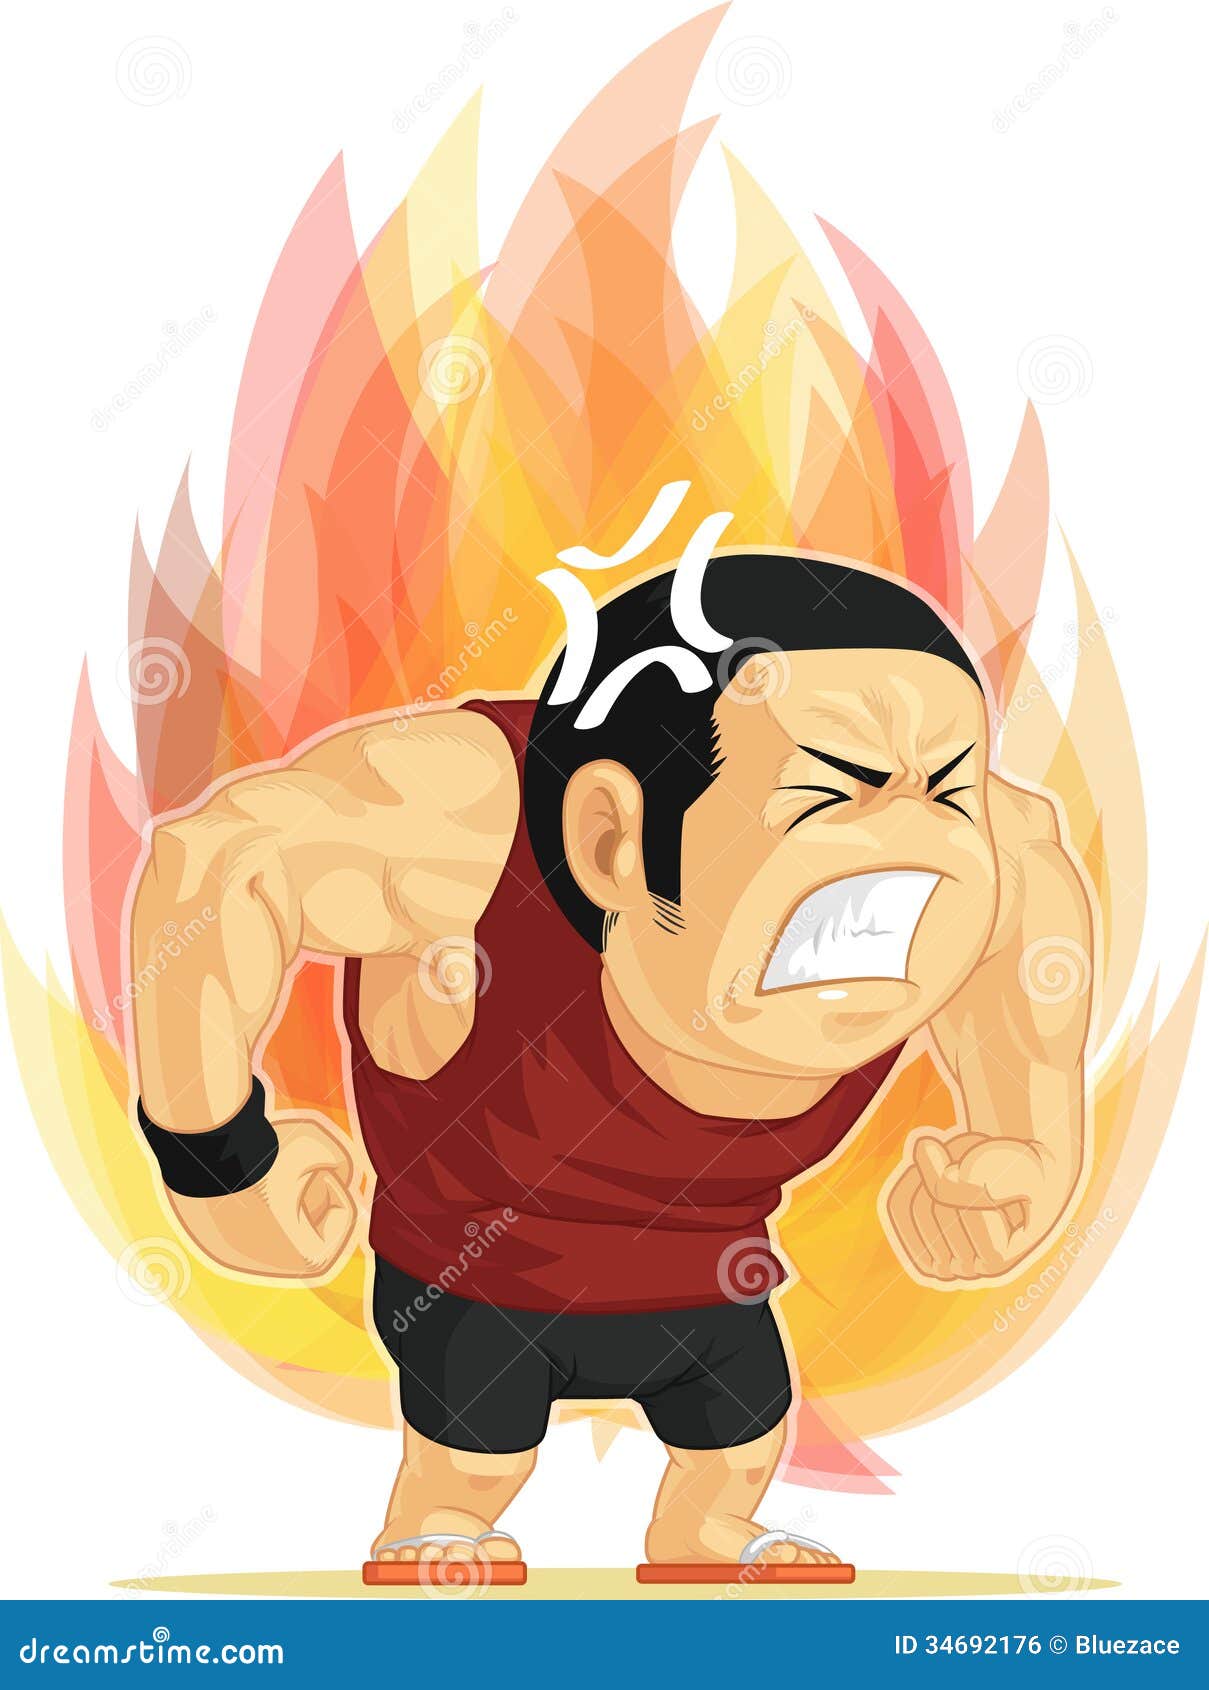 Cartoon of Angry Man stock vector. Illustration of irritated - 34692176